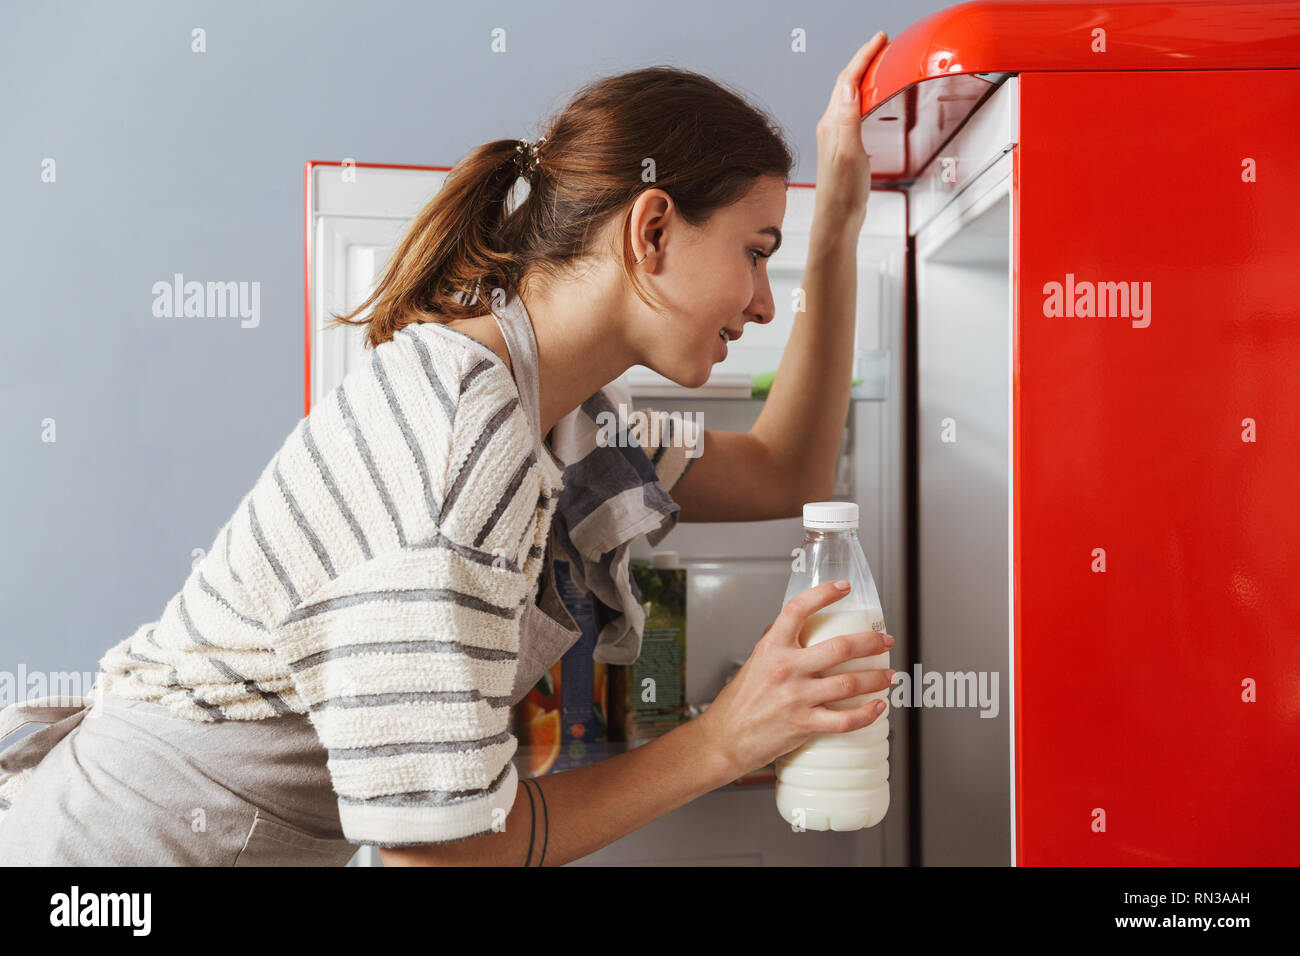 https://c8.alamy.com/comp/RN3AAH/happy-young-woman-standing-at-the-kitchen-at-home-taking-bottle-of-milk-from-a-fridge-RN3AAH.jpg